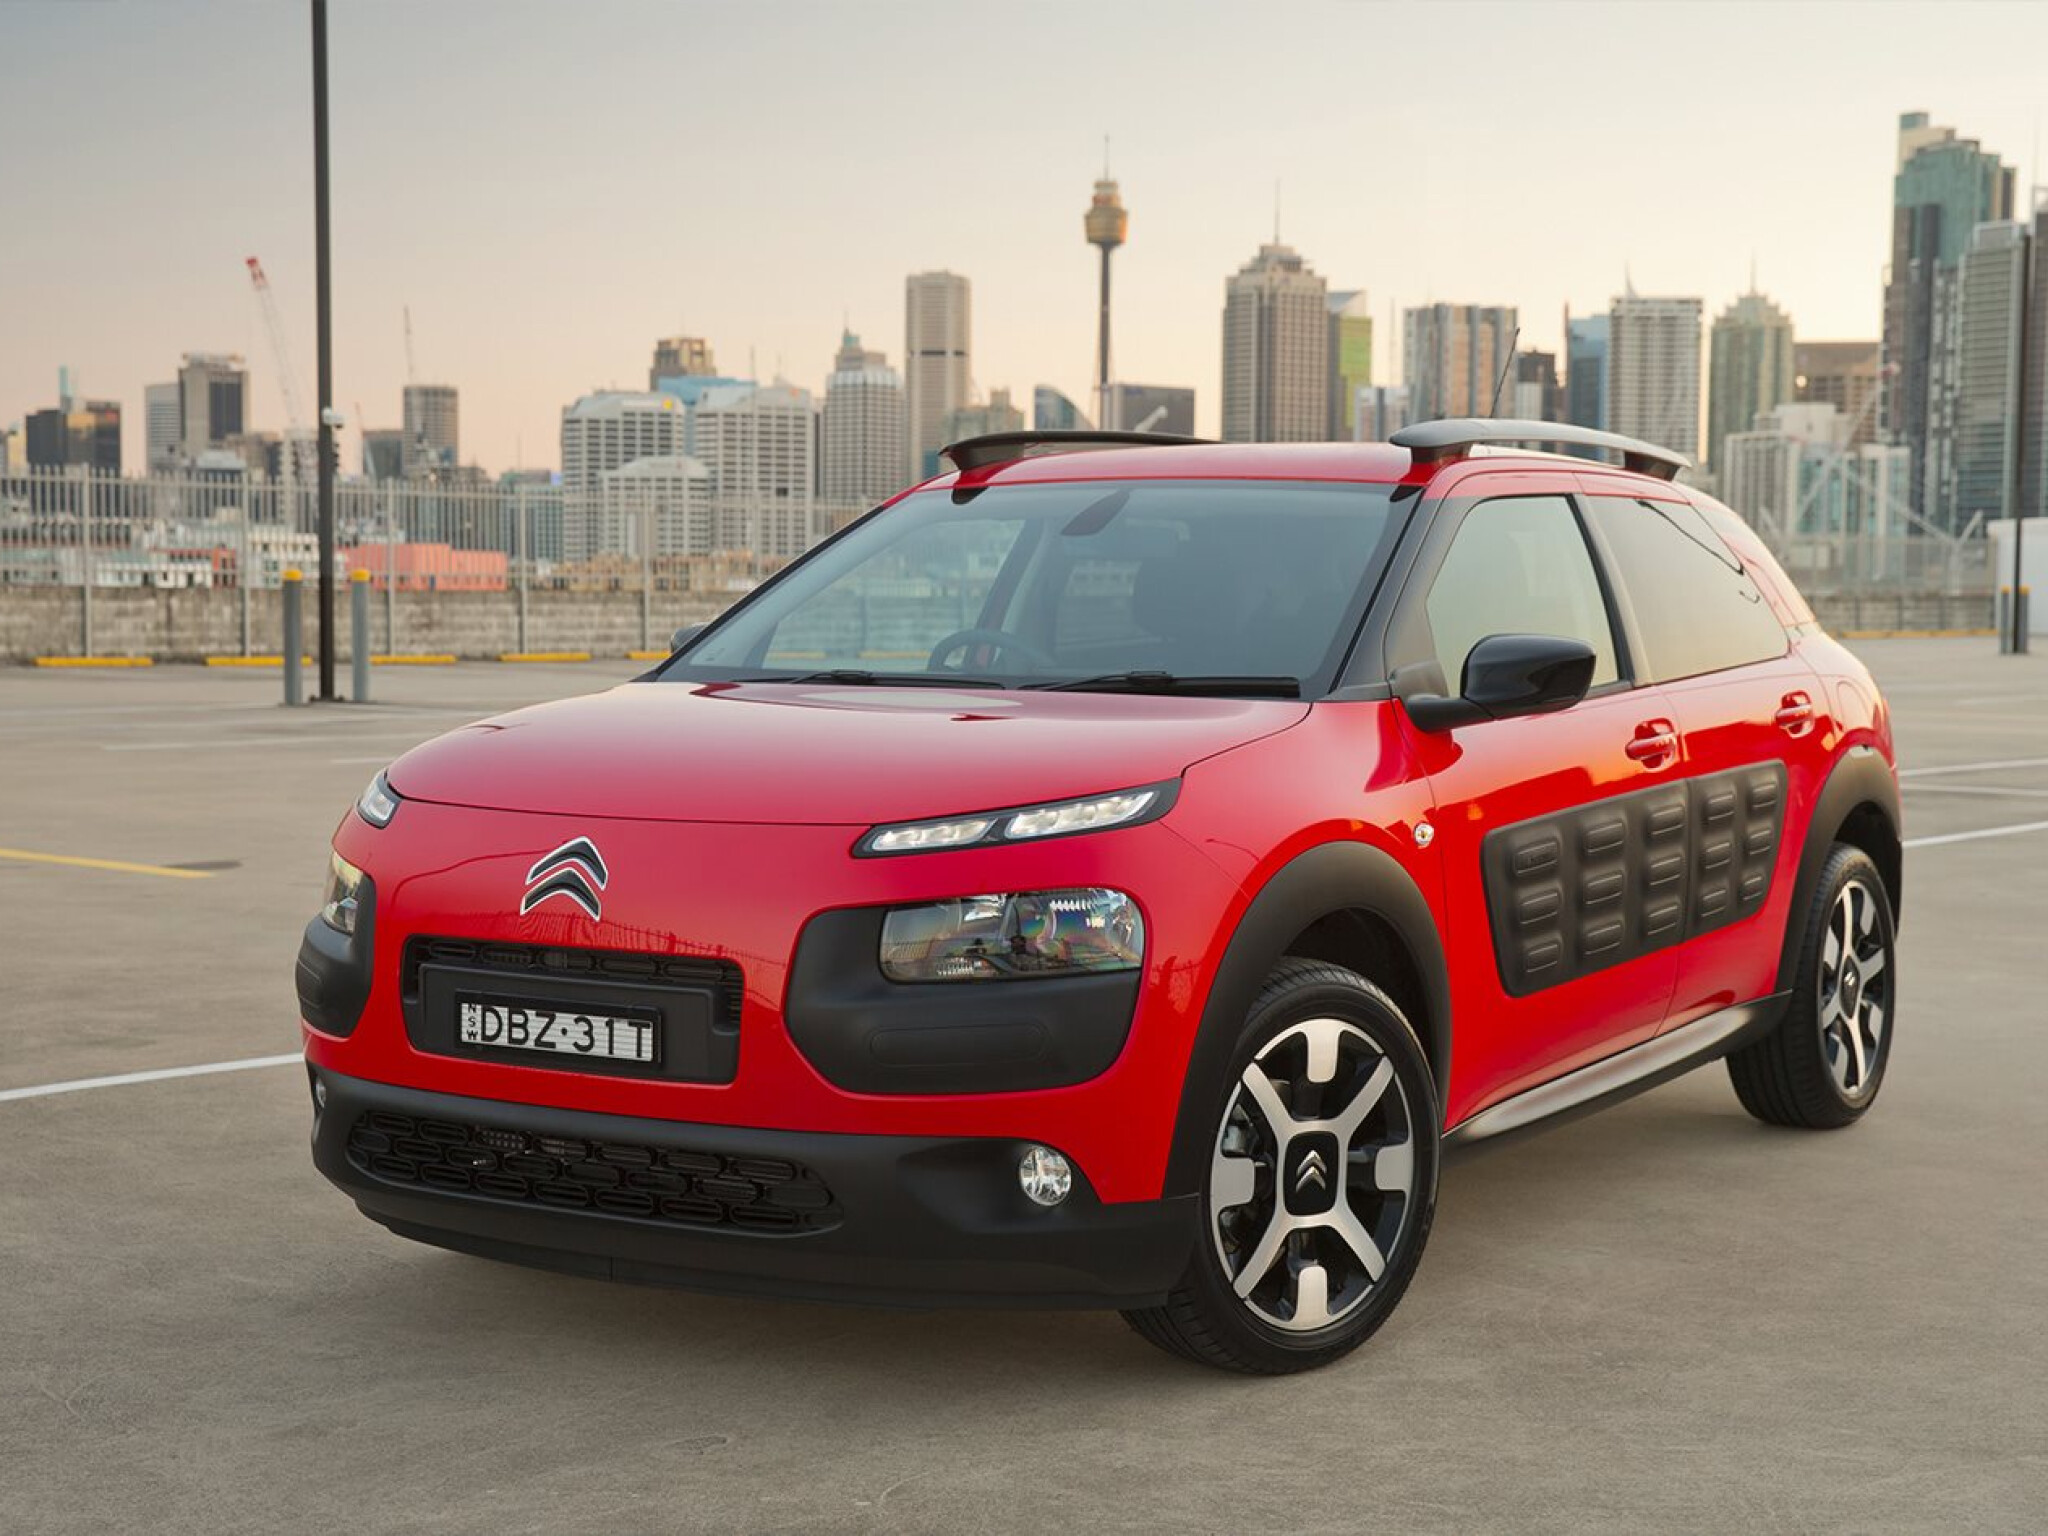 2018 Citroen C4 Cactus Exclusive Review  New Auto Transmission Adds To  Quality SUV - Drive